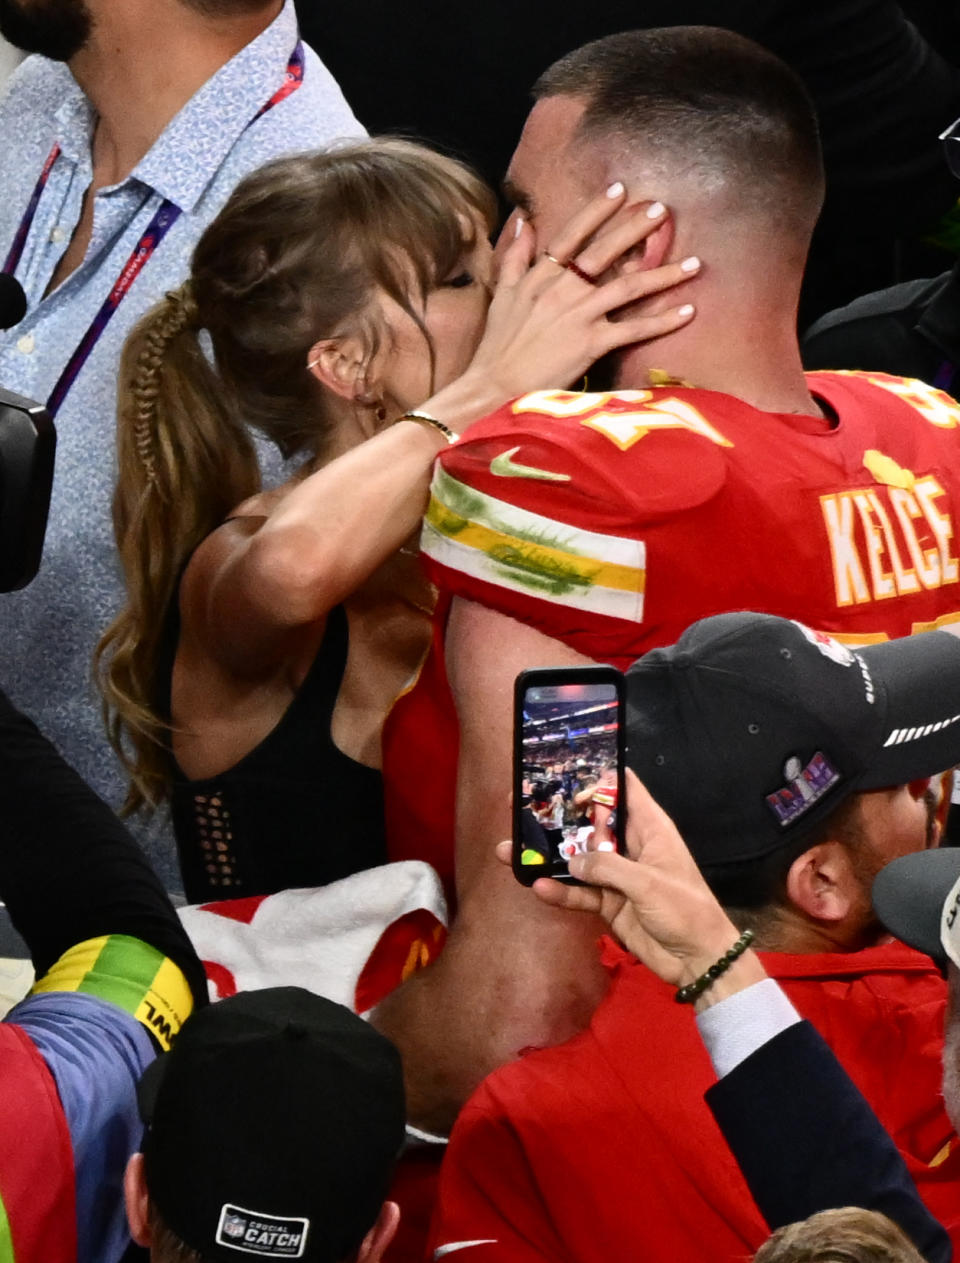 US singer-songwriter Taylor Swift kisses Kansas City Chiefs' tight end #87 Travis Kelce after the Chiefs won Super Bowl LVIII against the San Francisco 49ers at Allegiant Stadium in Las Vegas, Nevada, February 11, 2024. (Photo by Patrick T. Fallon / AFP) (Photo by PATRICK T. FALLON/AFP via Getty Images)